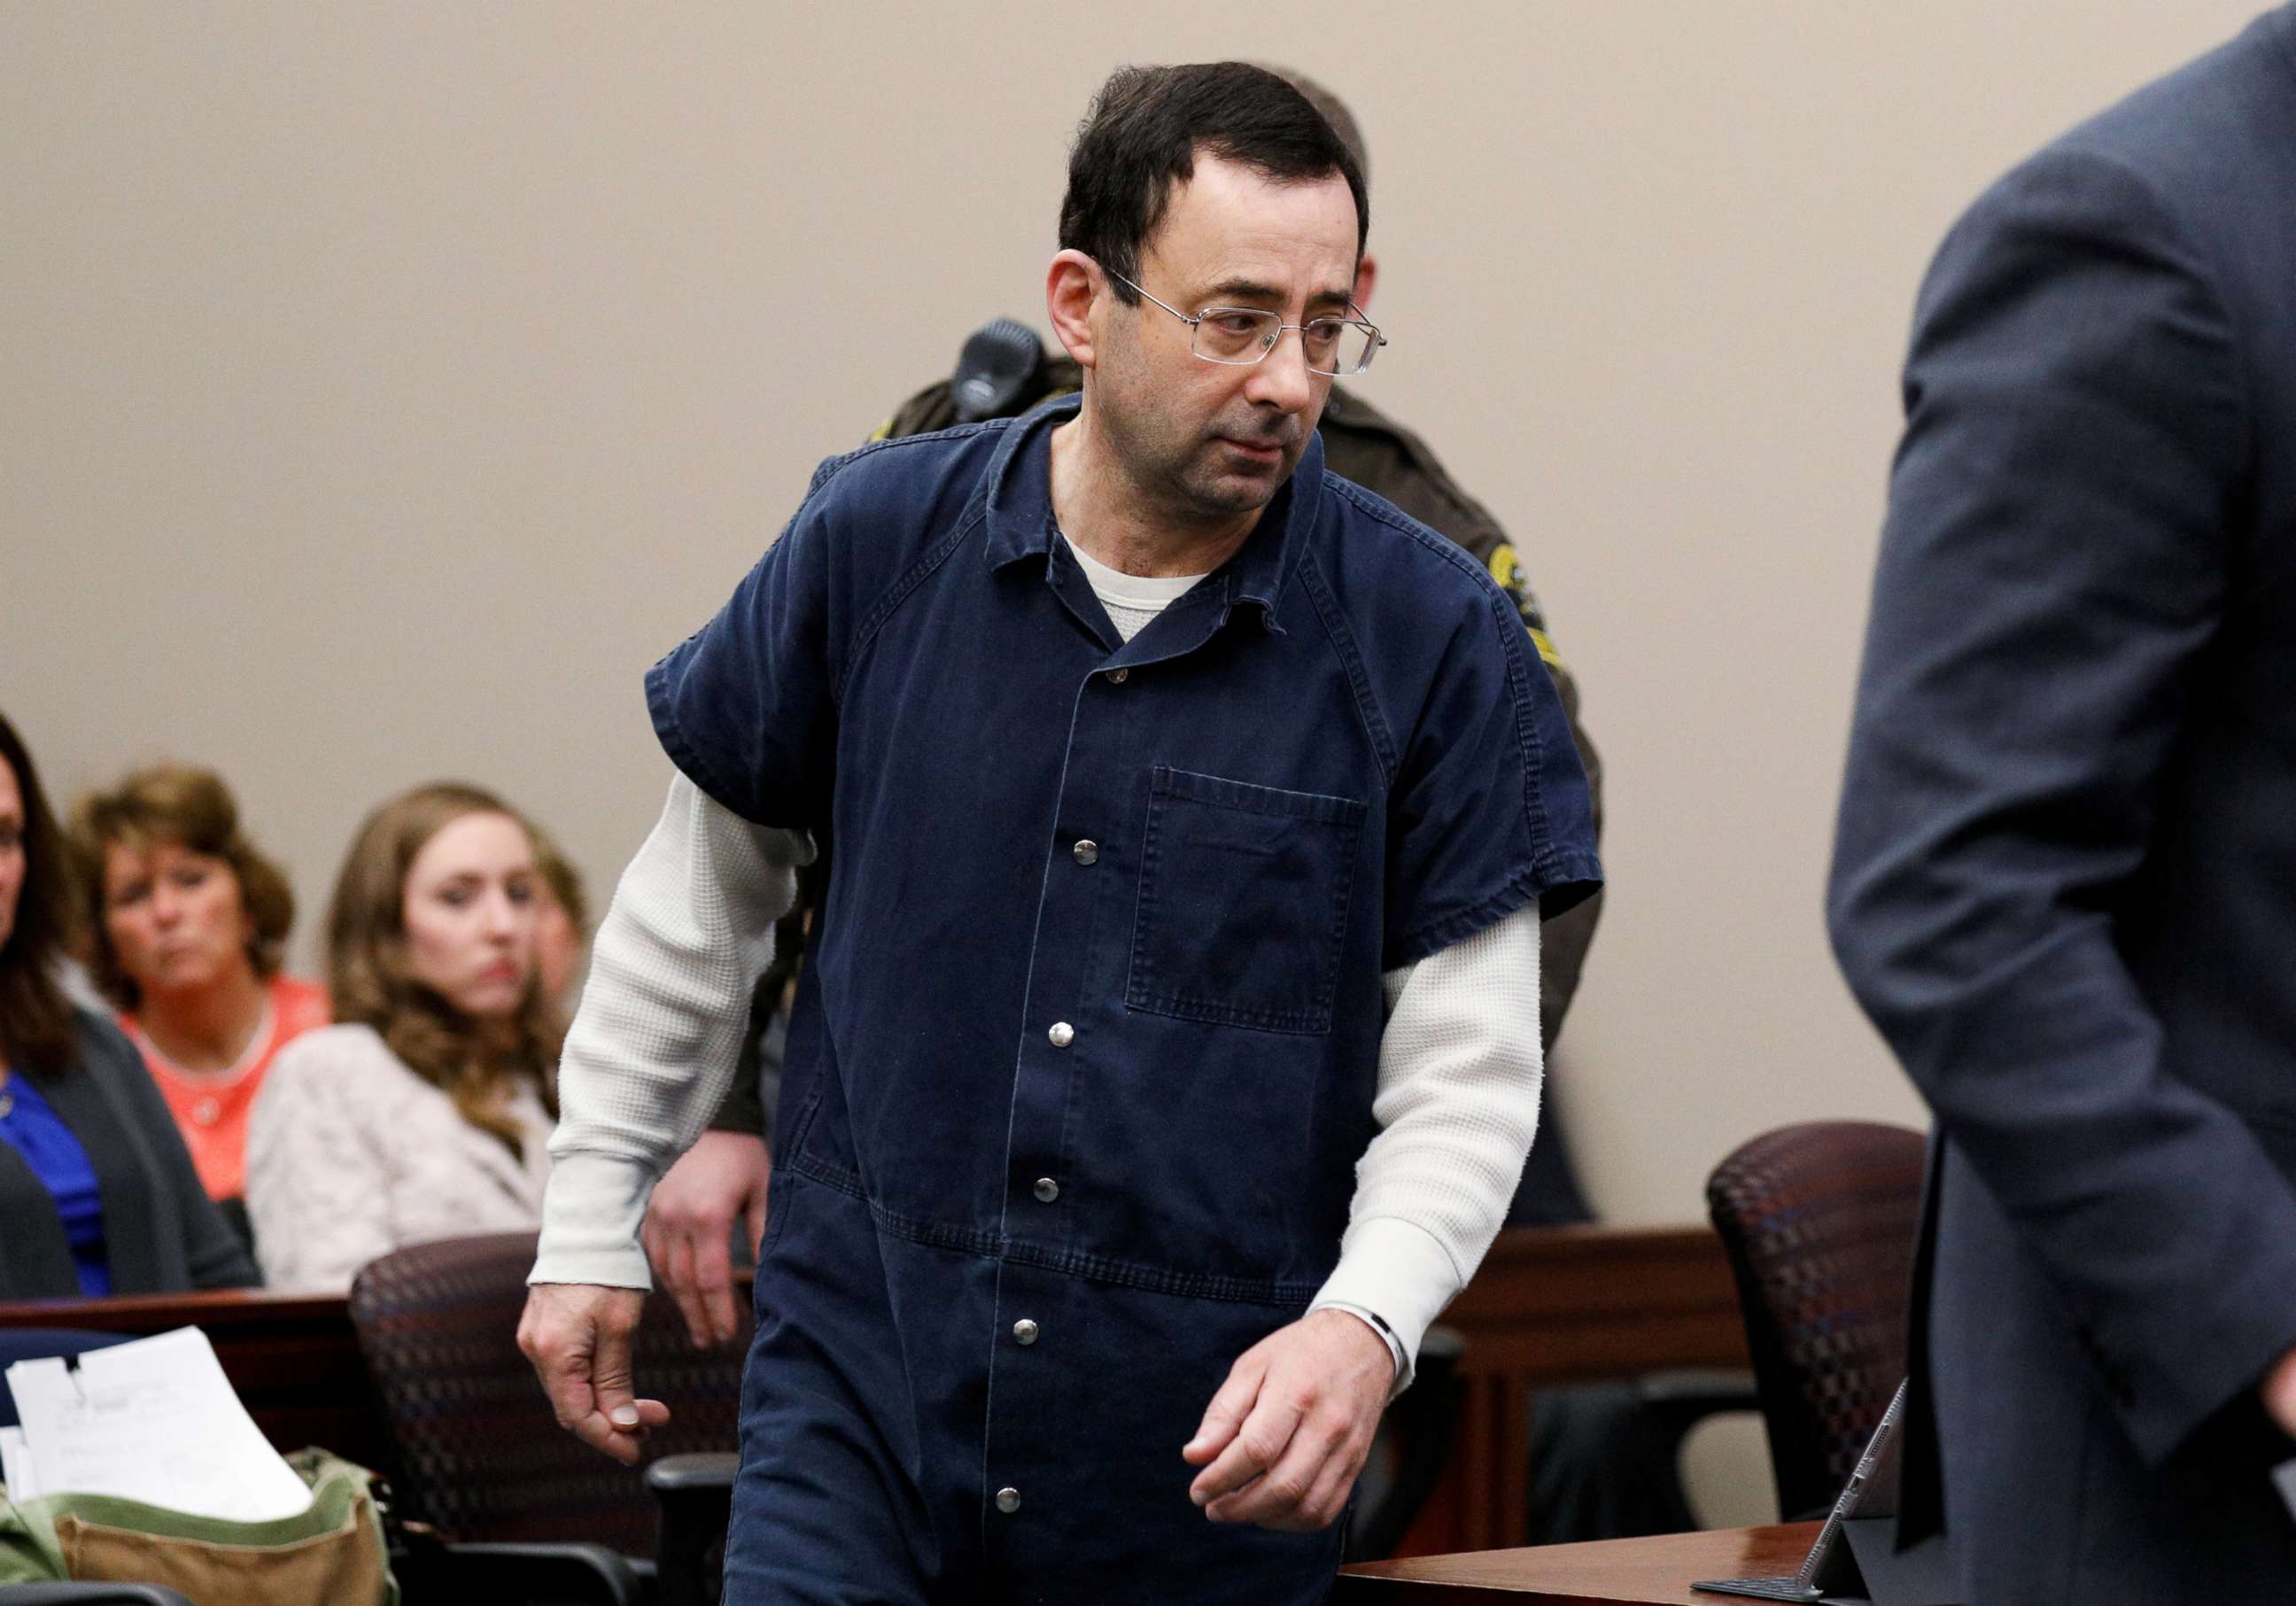 PHOTO: Dr. Larry Nassar, a former team USA Gymnastics doctor who pleaded guilty in November 2017 to sexual assault charges, arrives in the courtroom for his sentencing hearing in Lansing, Mich., Jan. 16, 2018.